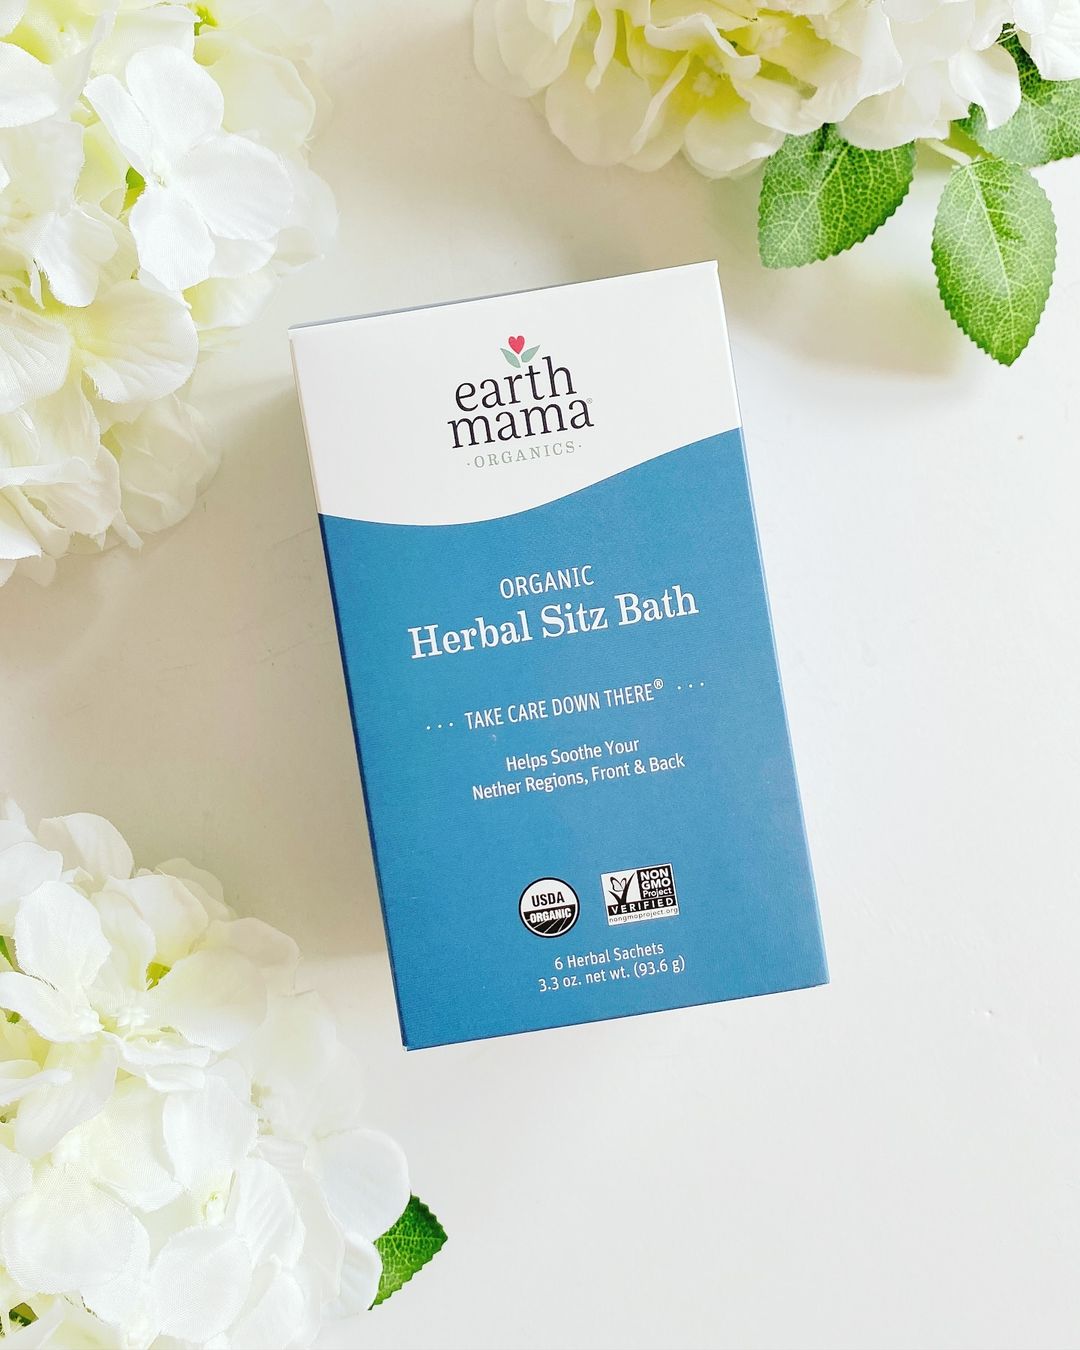 Earth Mama USDA Certified Organic Herbal Sitz Bath review and promo code